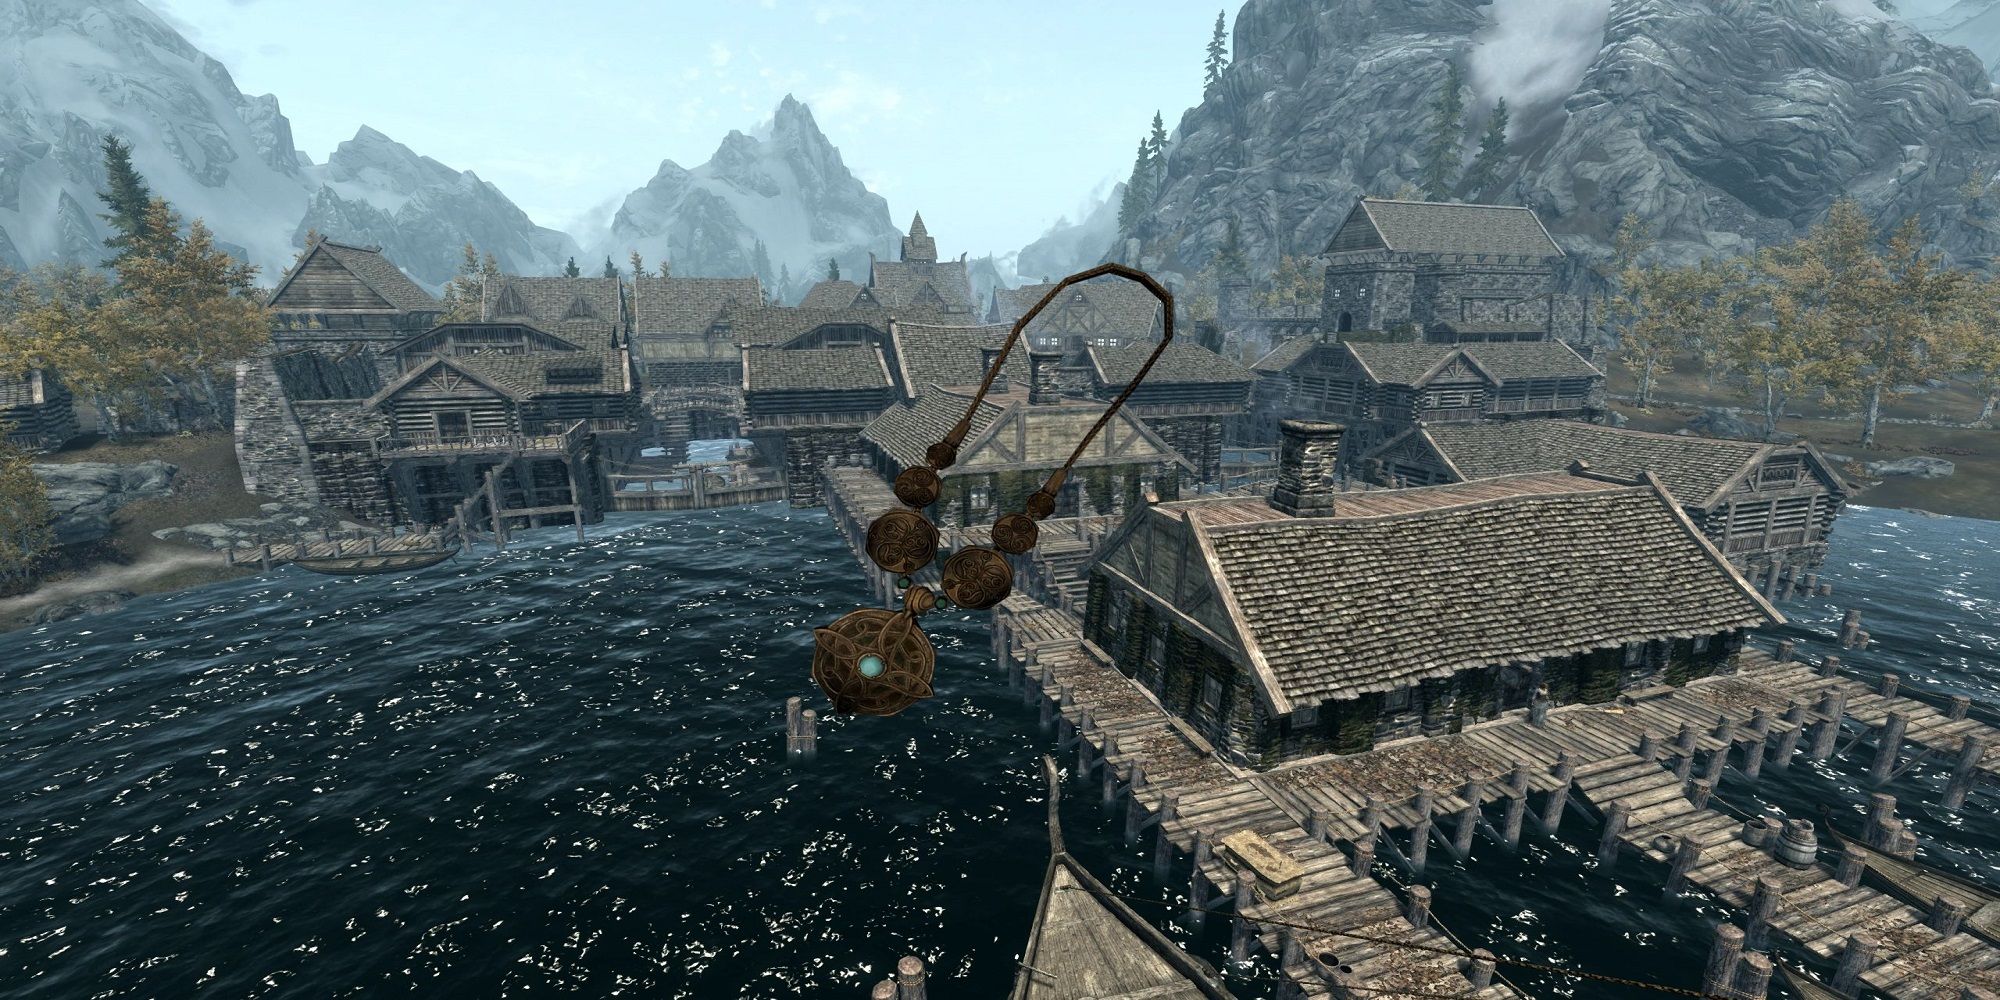 The Amulet of Mara superimposed over the city of Riften in Skyrim